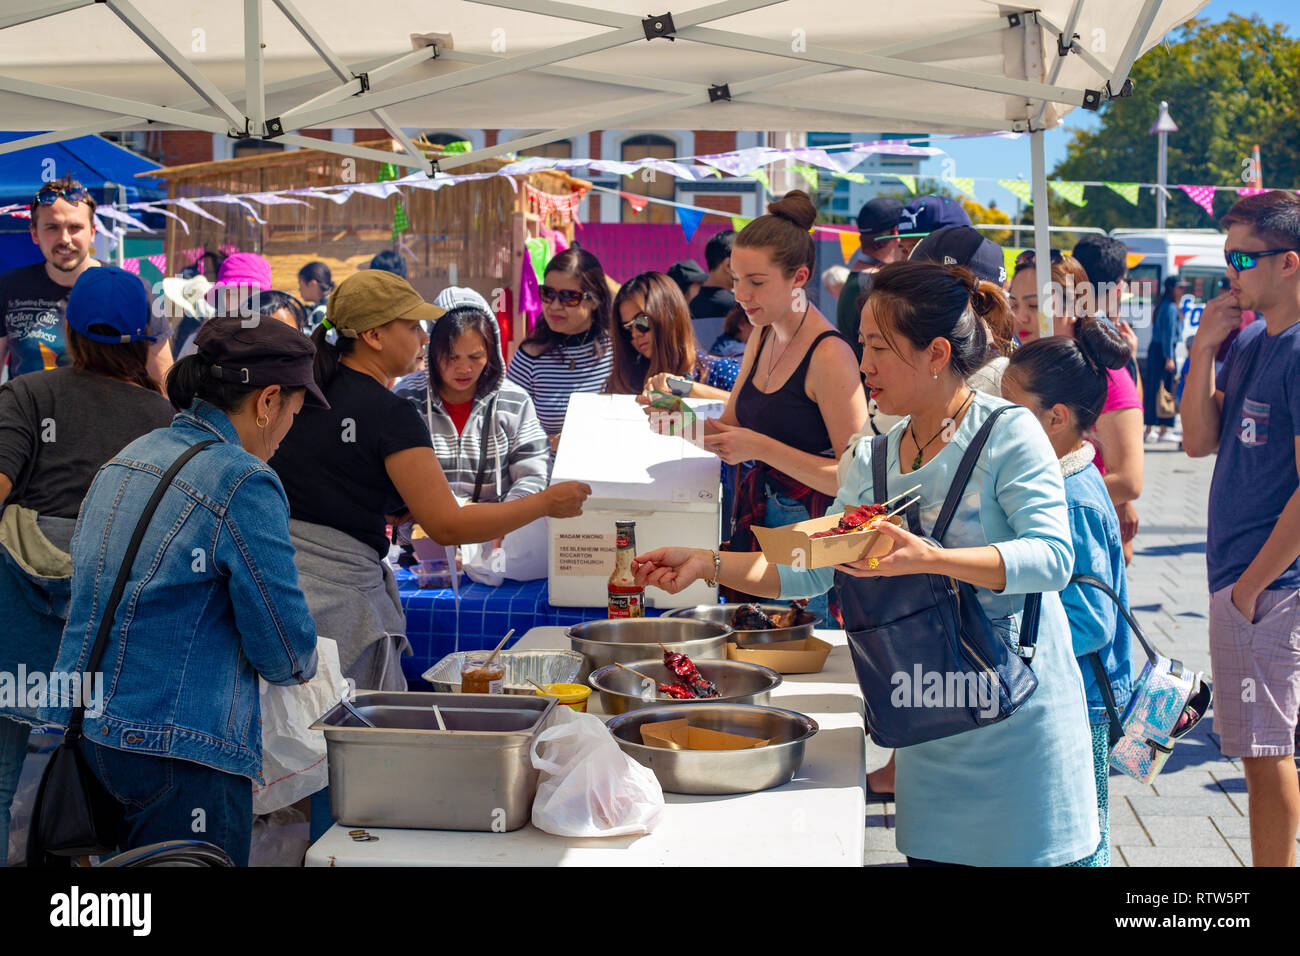 Christchurch, Canterbury, New Zealand, March 1 2019: Christchurch Square food stalls for Philippines Day - a celebration of the Filippino culture Stock Photo